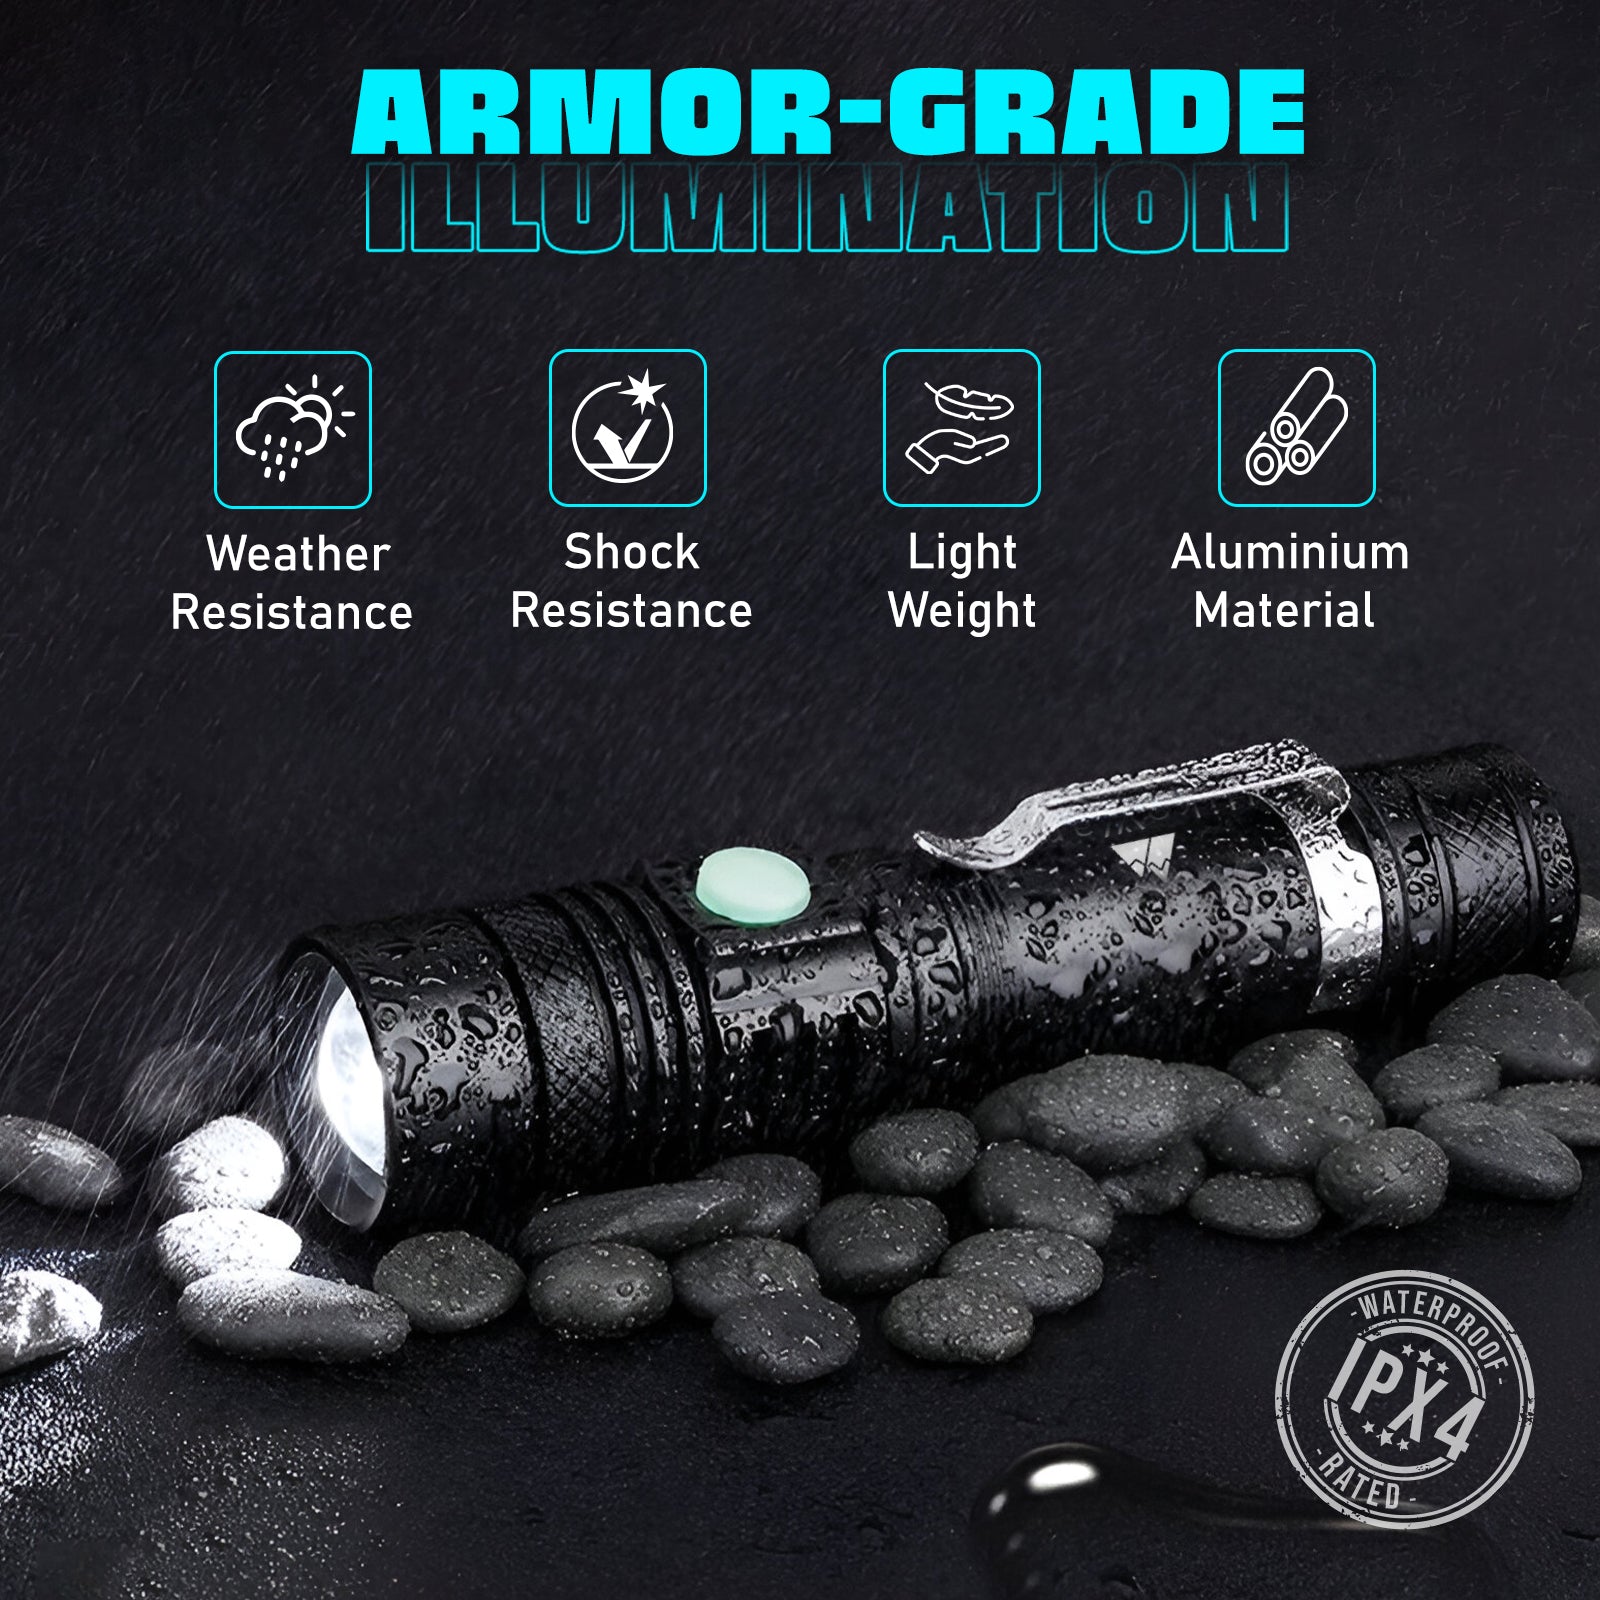 HikeWare Ultra Bright LED Flashlight. Waterproof, Zoomable, USB Rechargeable - HikeWare  Experience the power of HikeWare's Ultra Bright LED Flashlight. Waterproof, lightweight, and 10x brighter than incandescent lights.